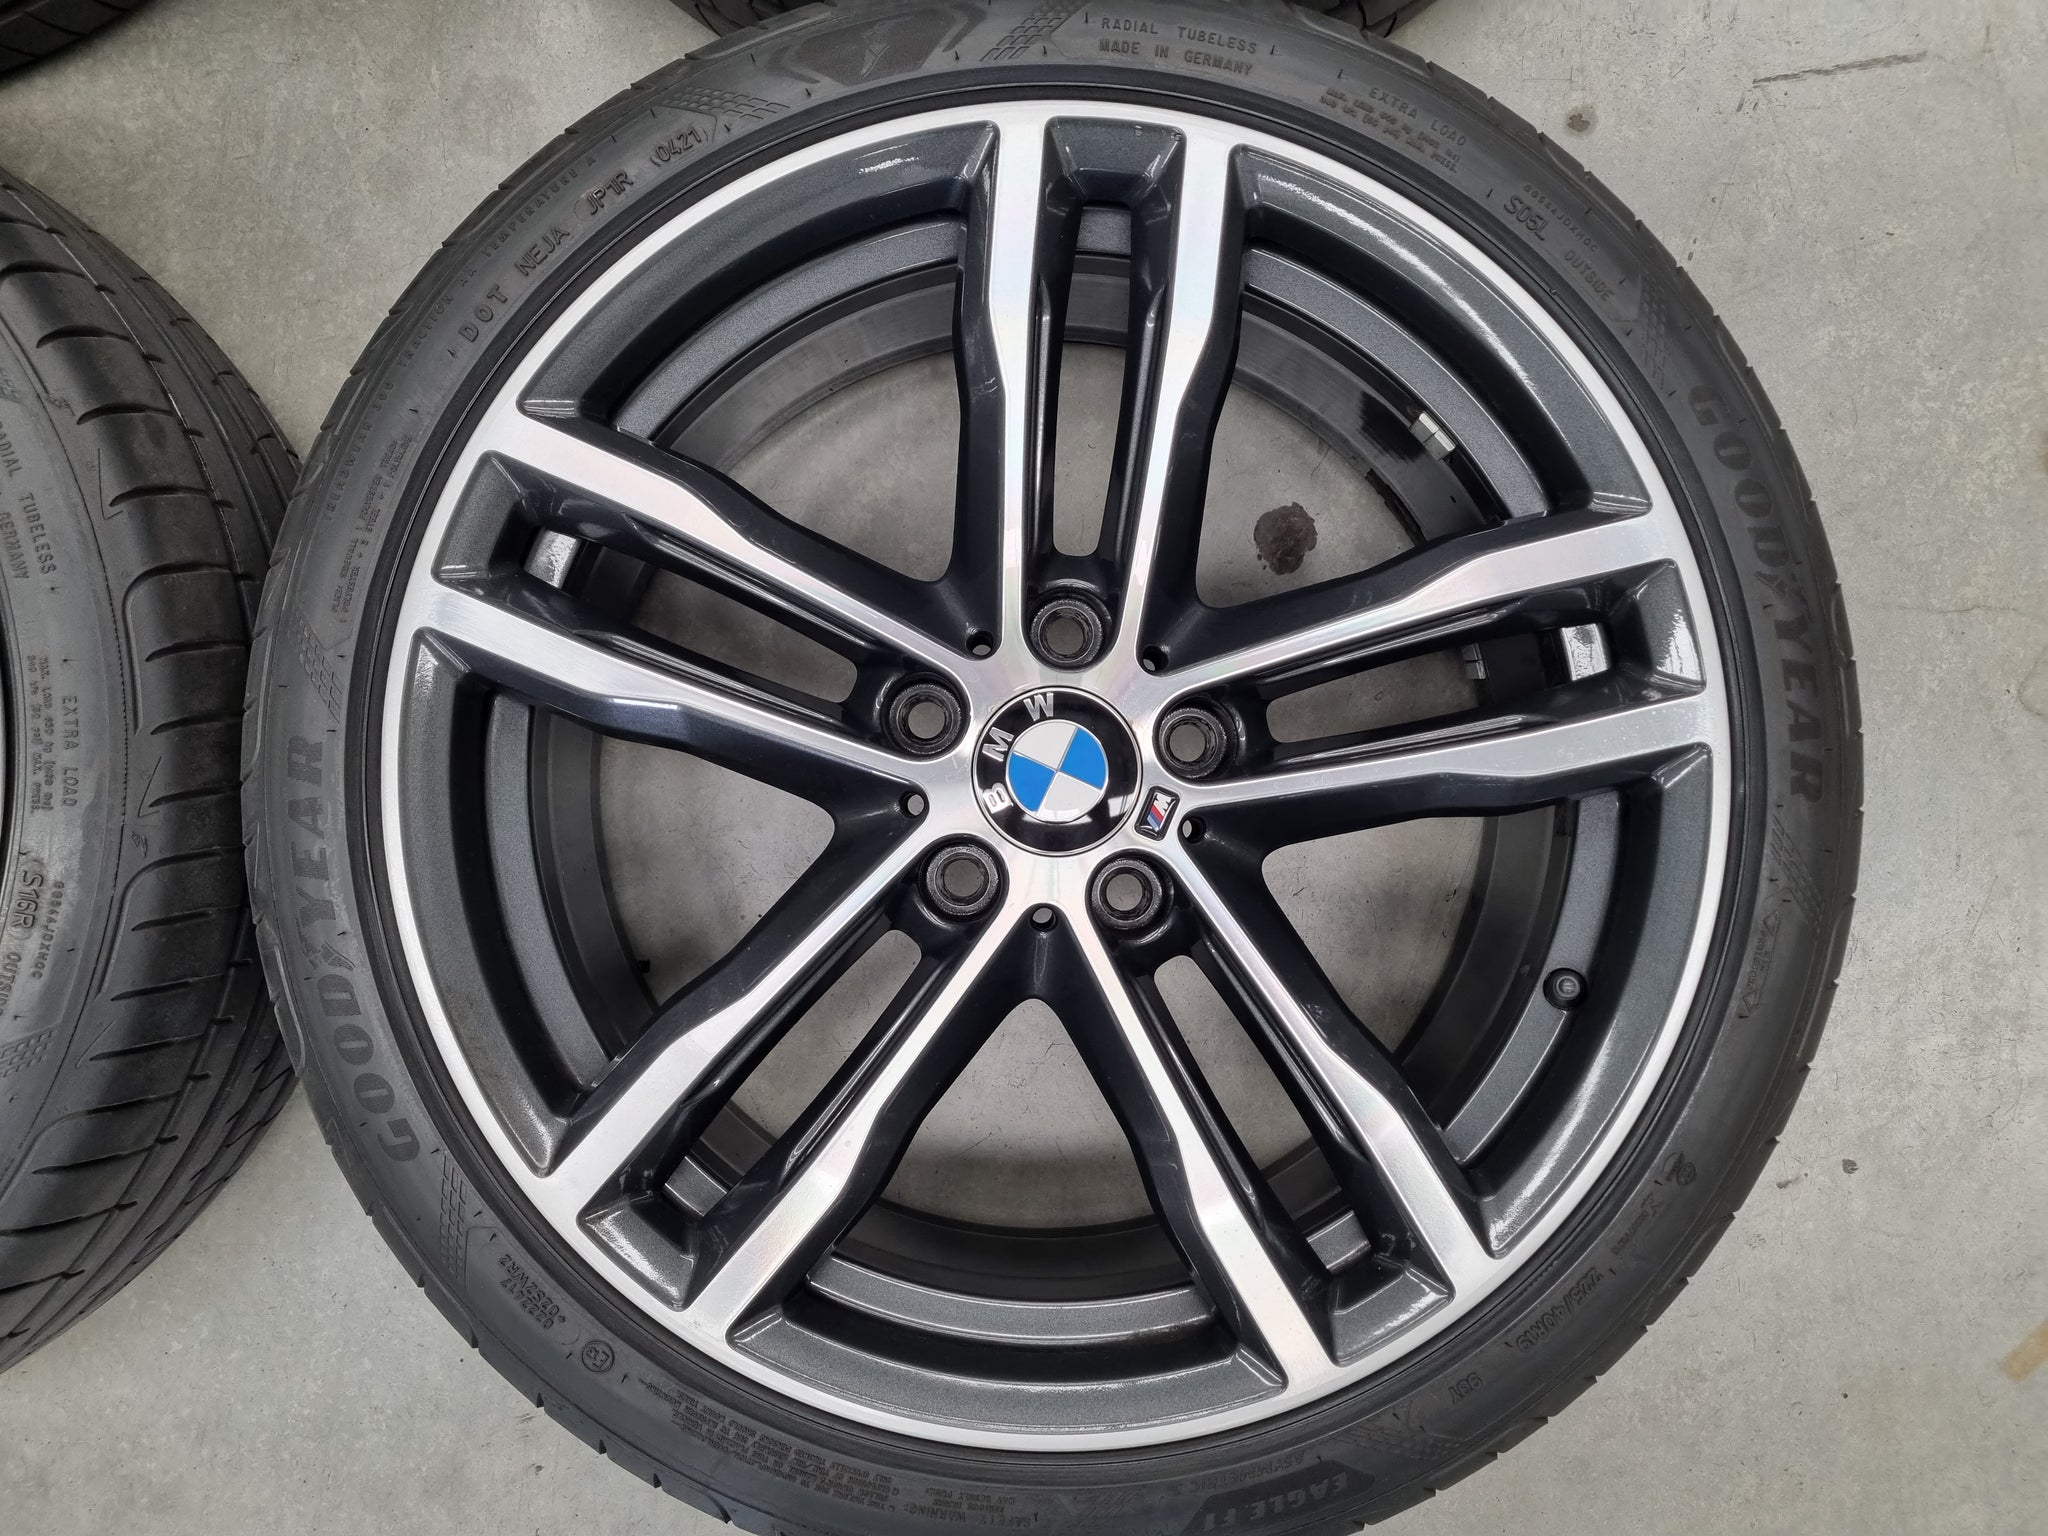 Load image into Gallery viewer, Genuine BMW 3 Series F30 Style 704M 19 Inch Wheels and Tyres Set of 4
